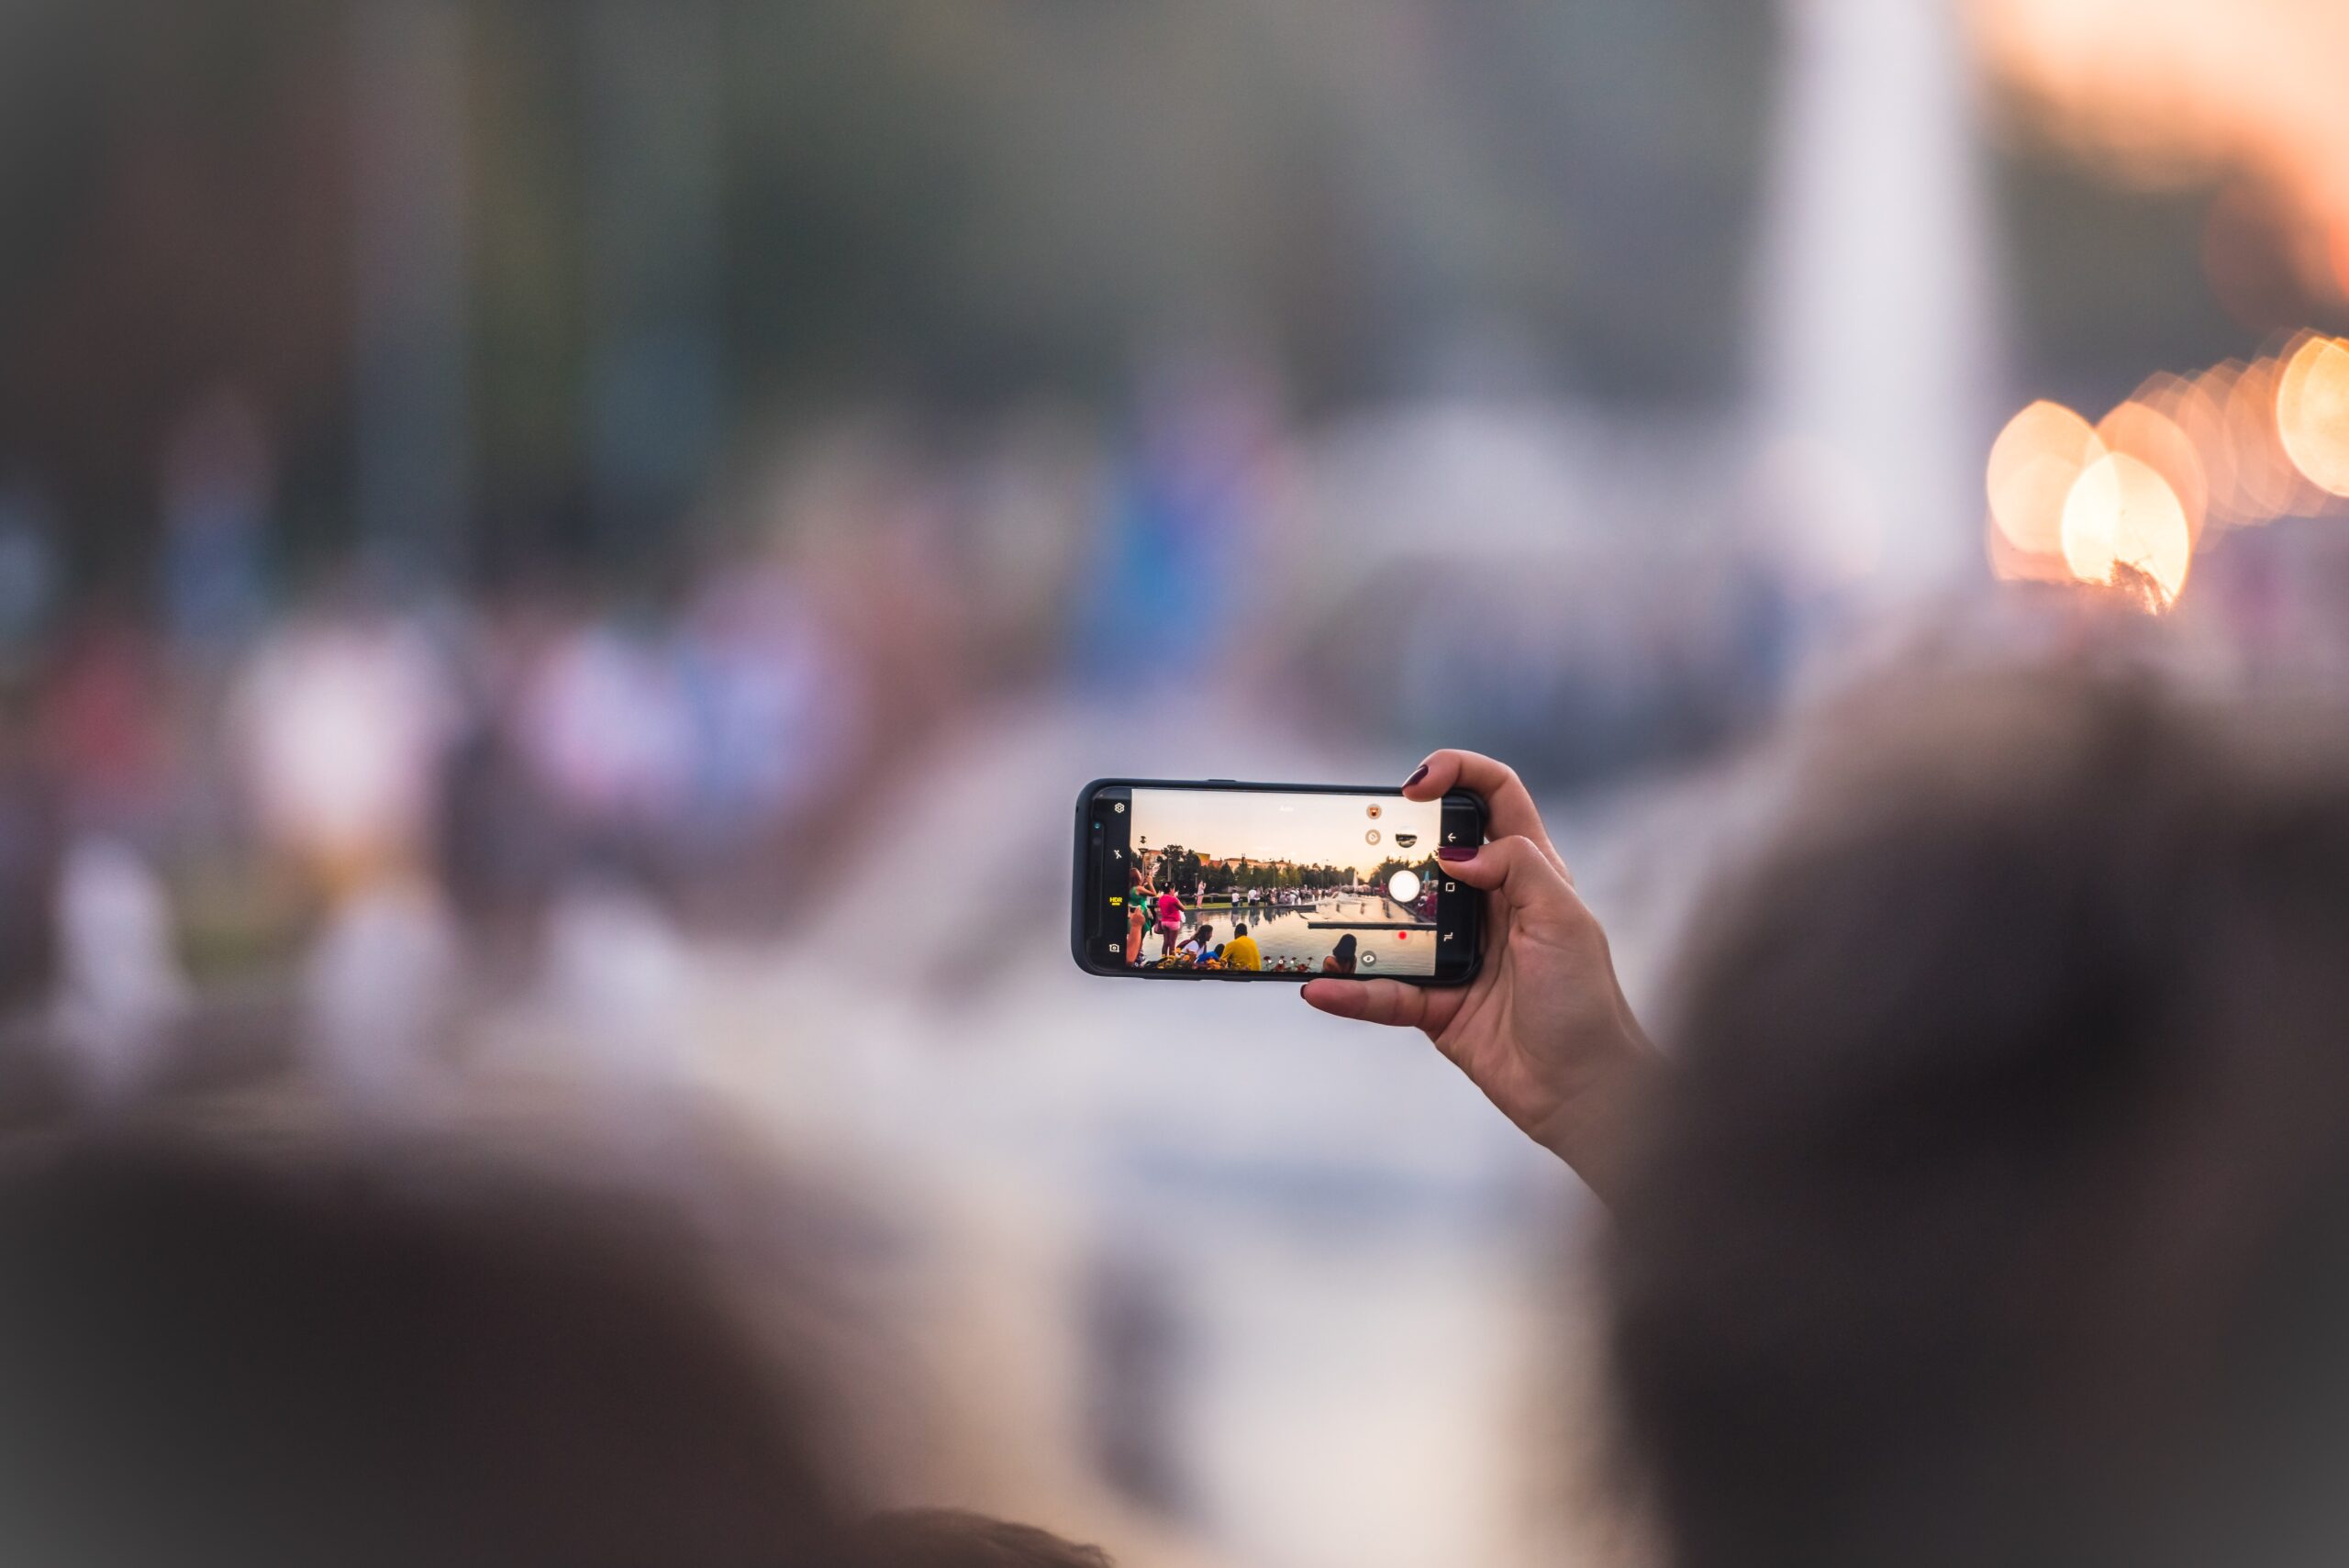 Image of a person taking a photo on their mobile phone